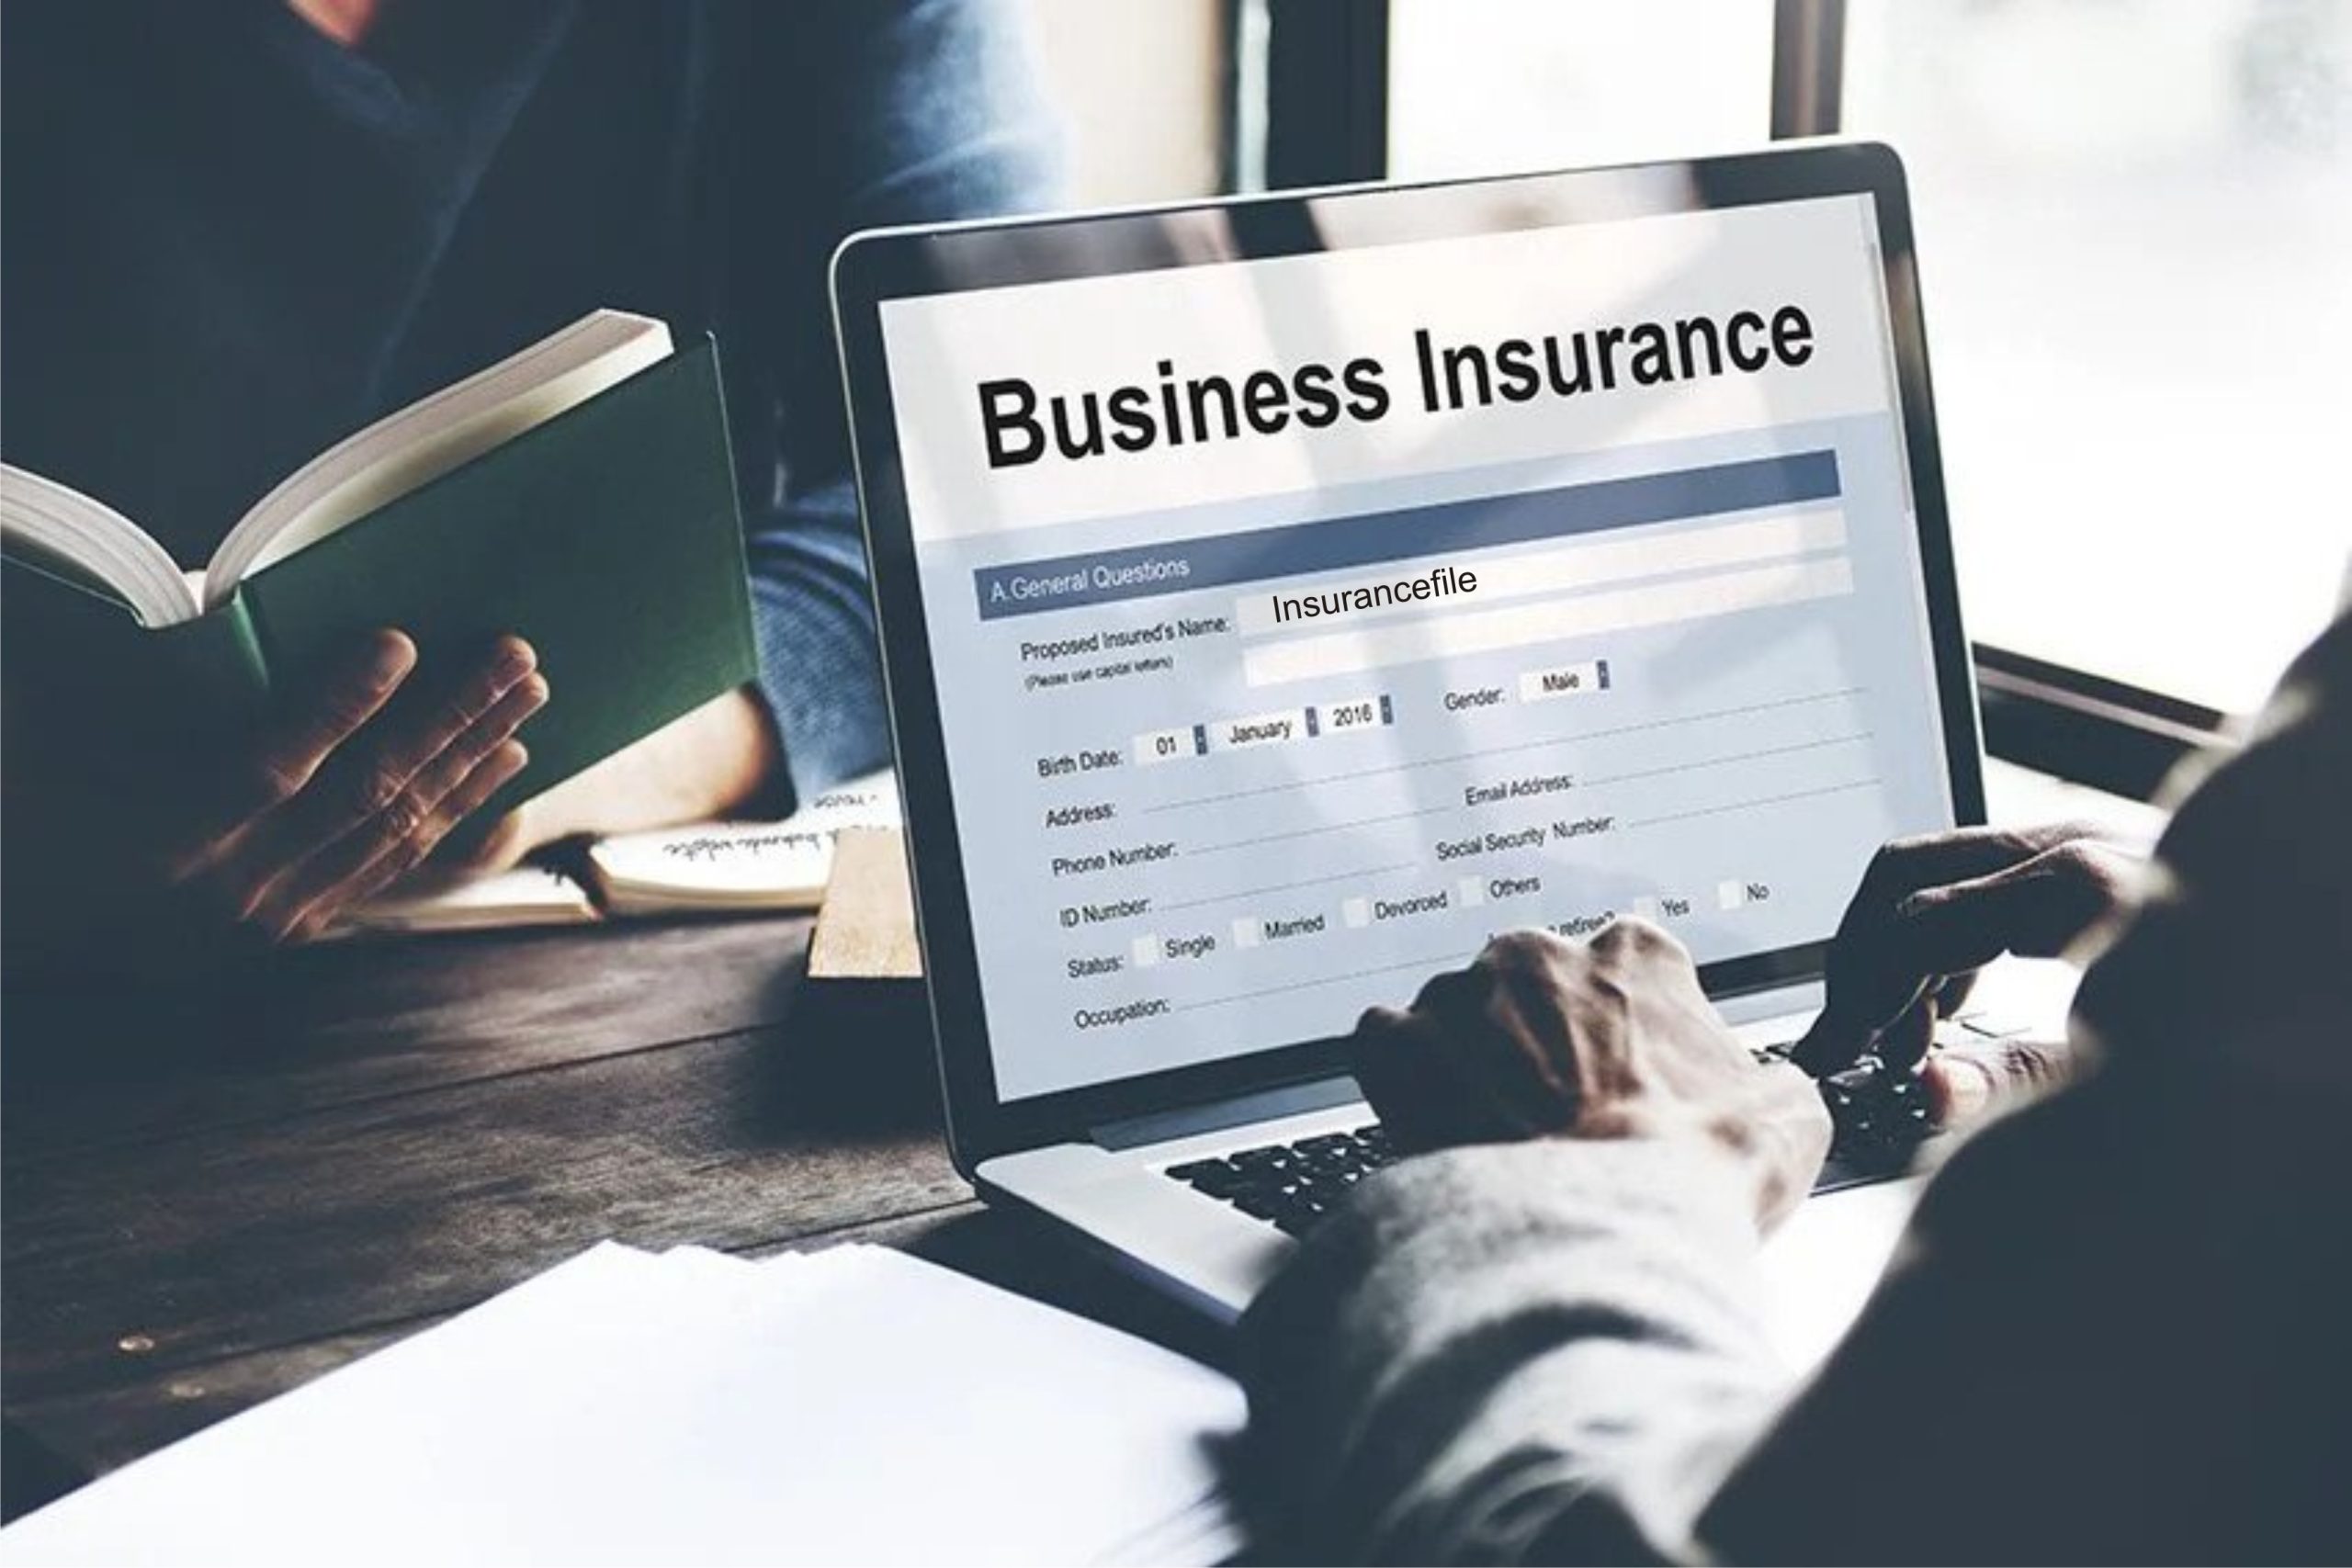 How to Register for Business Insurance